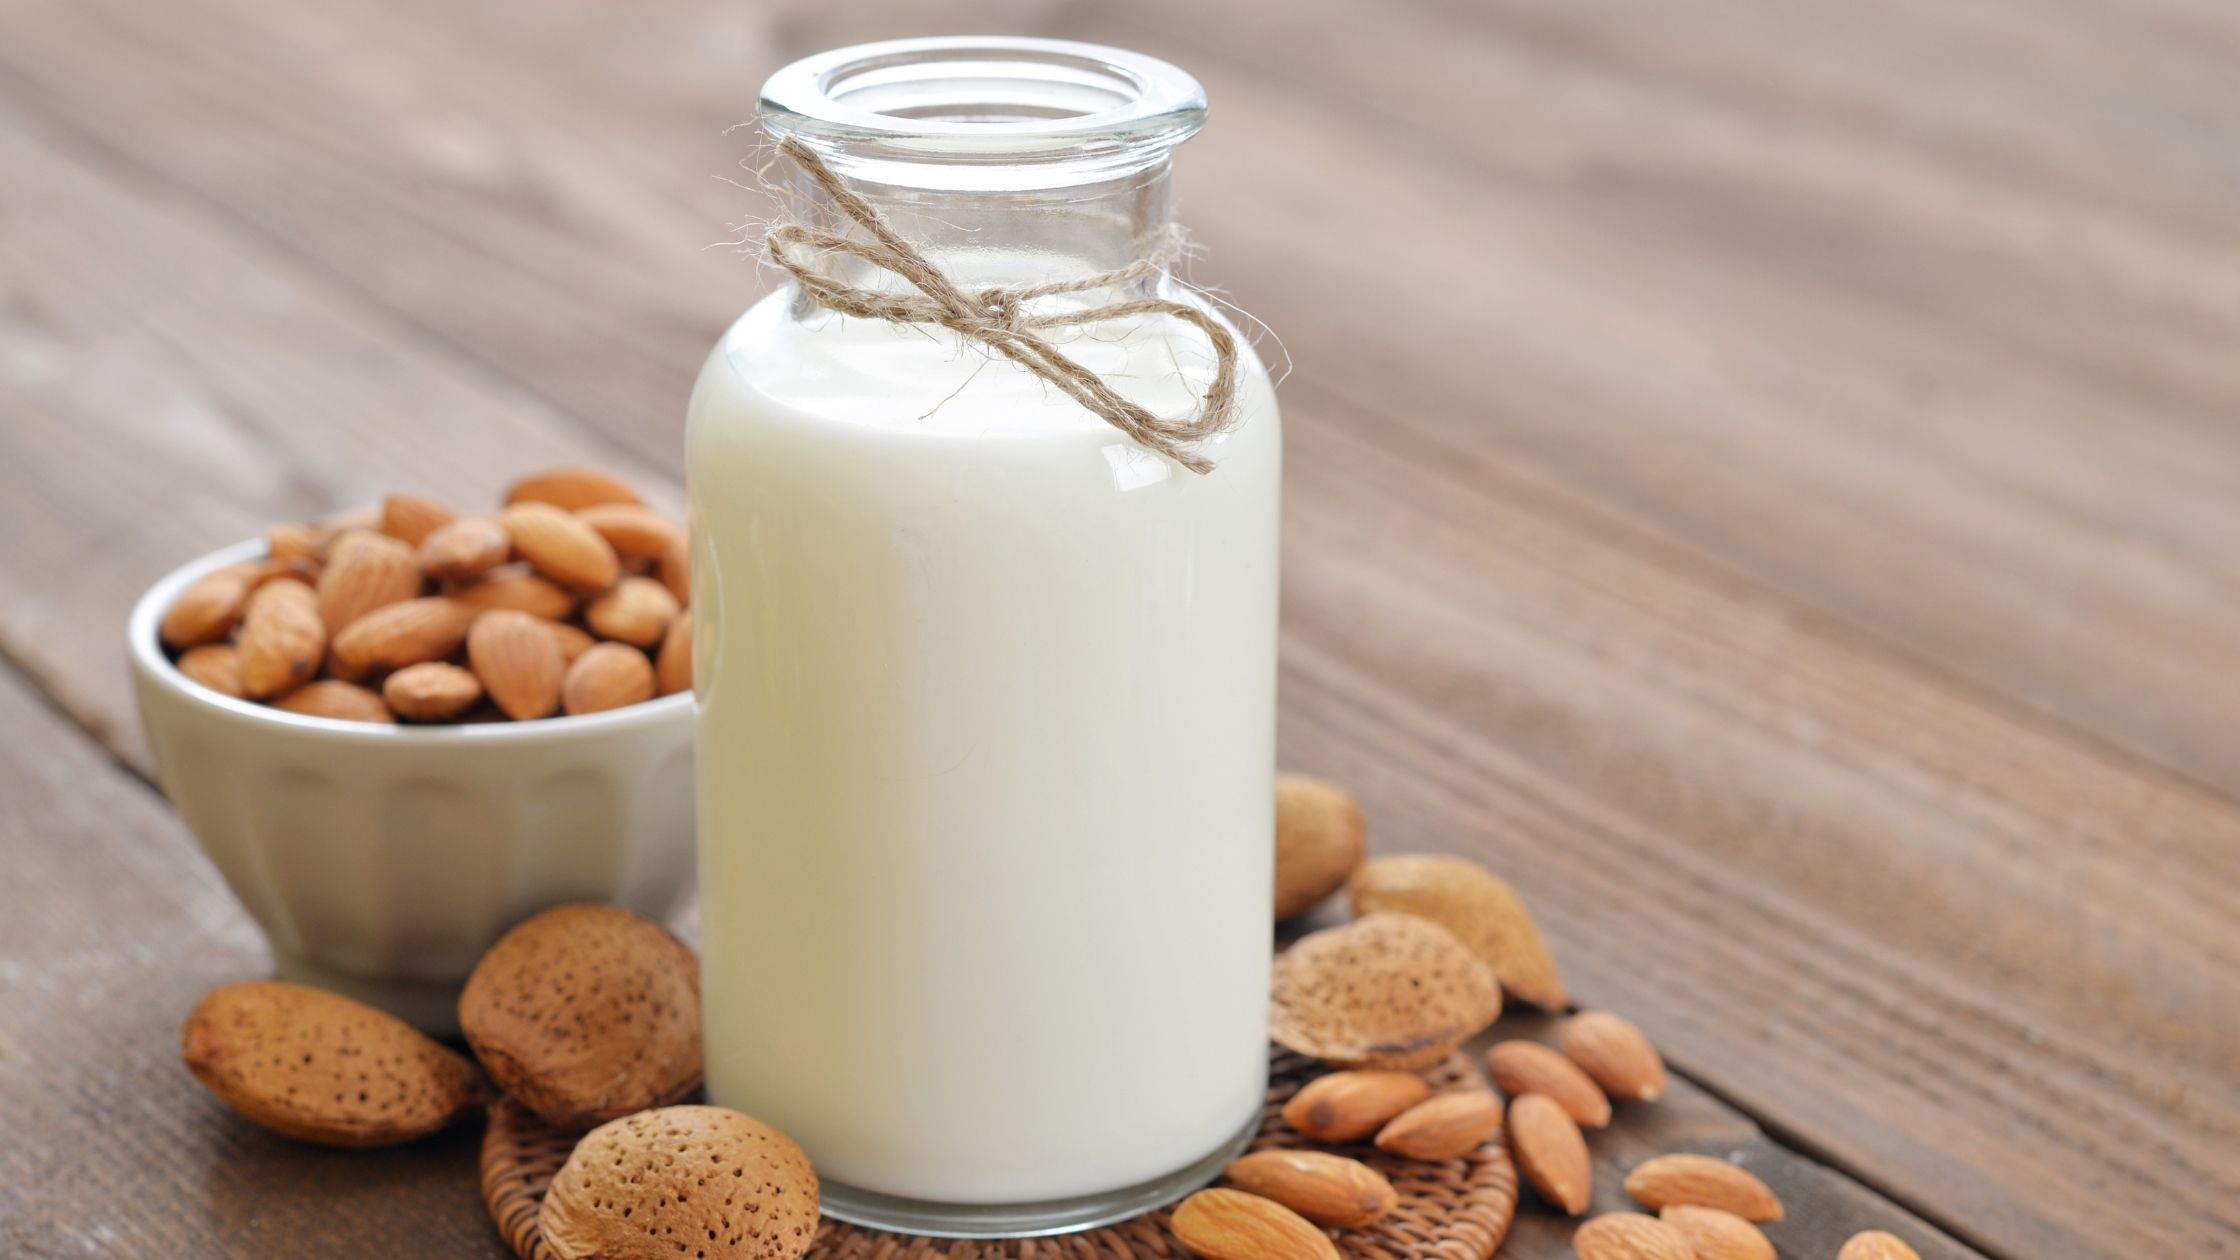 Almond Milk for Dairy-Free Beverages